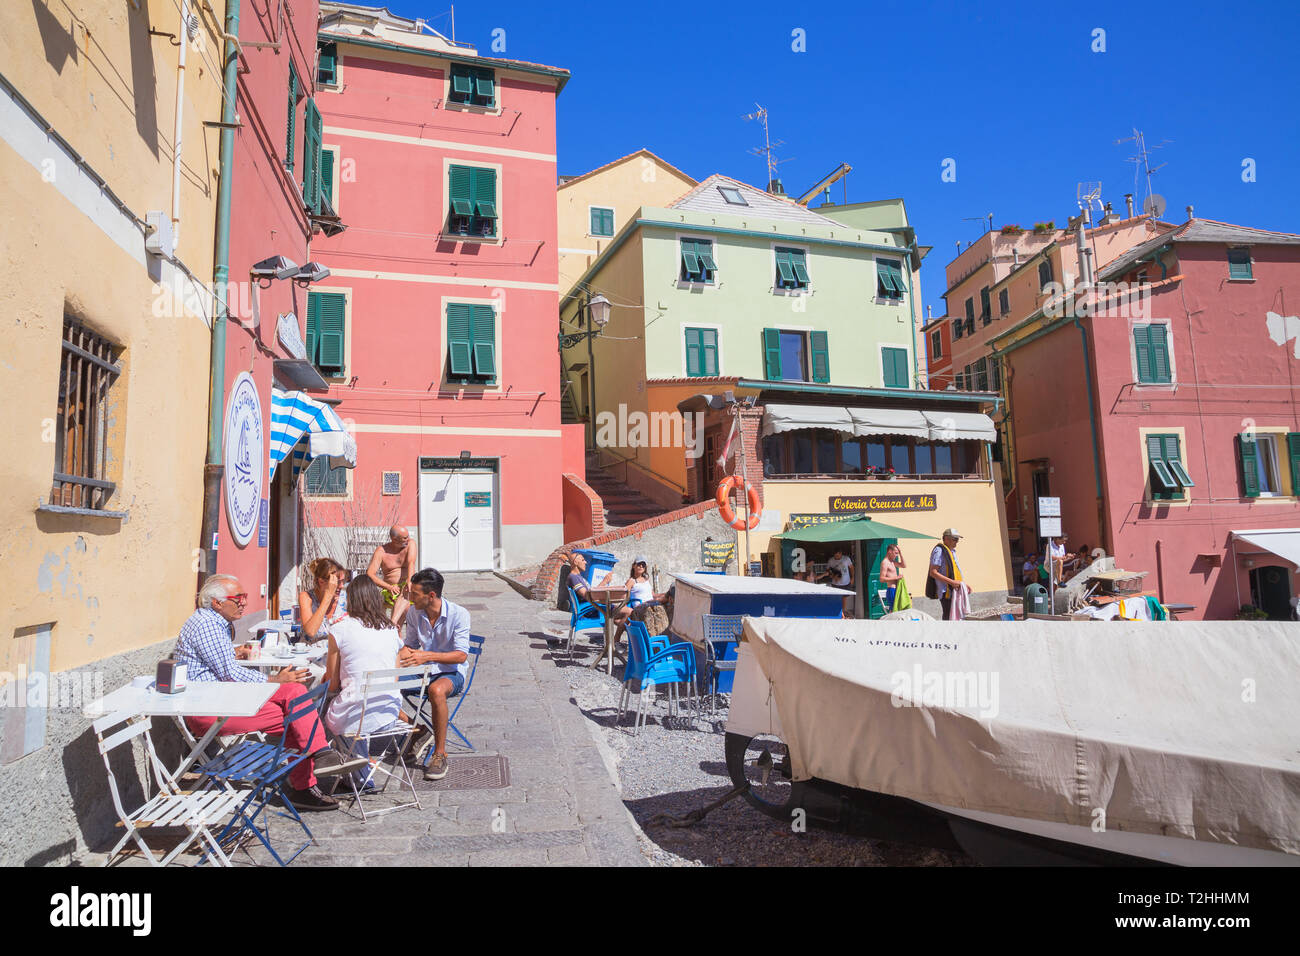 People dining at cafe in Boccadasse fishing village, Genoa, Liguria, Italy, Europe Stock Photo